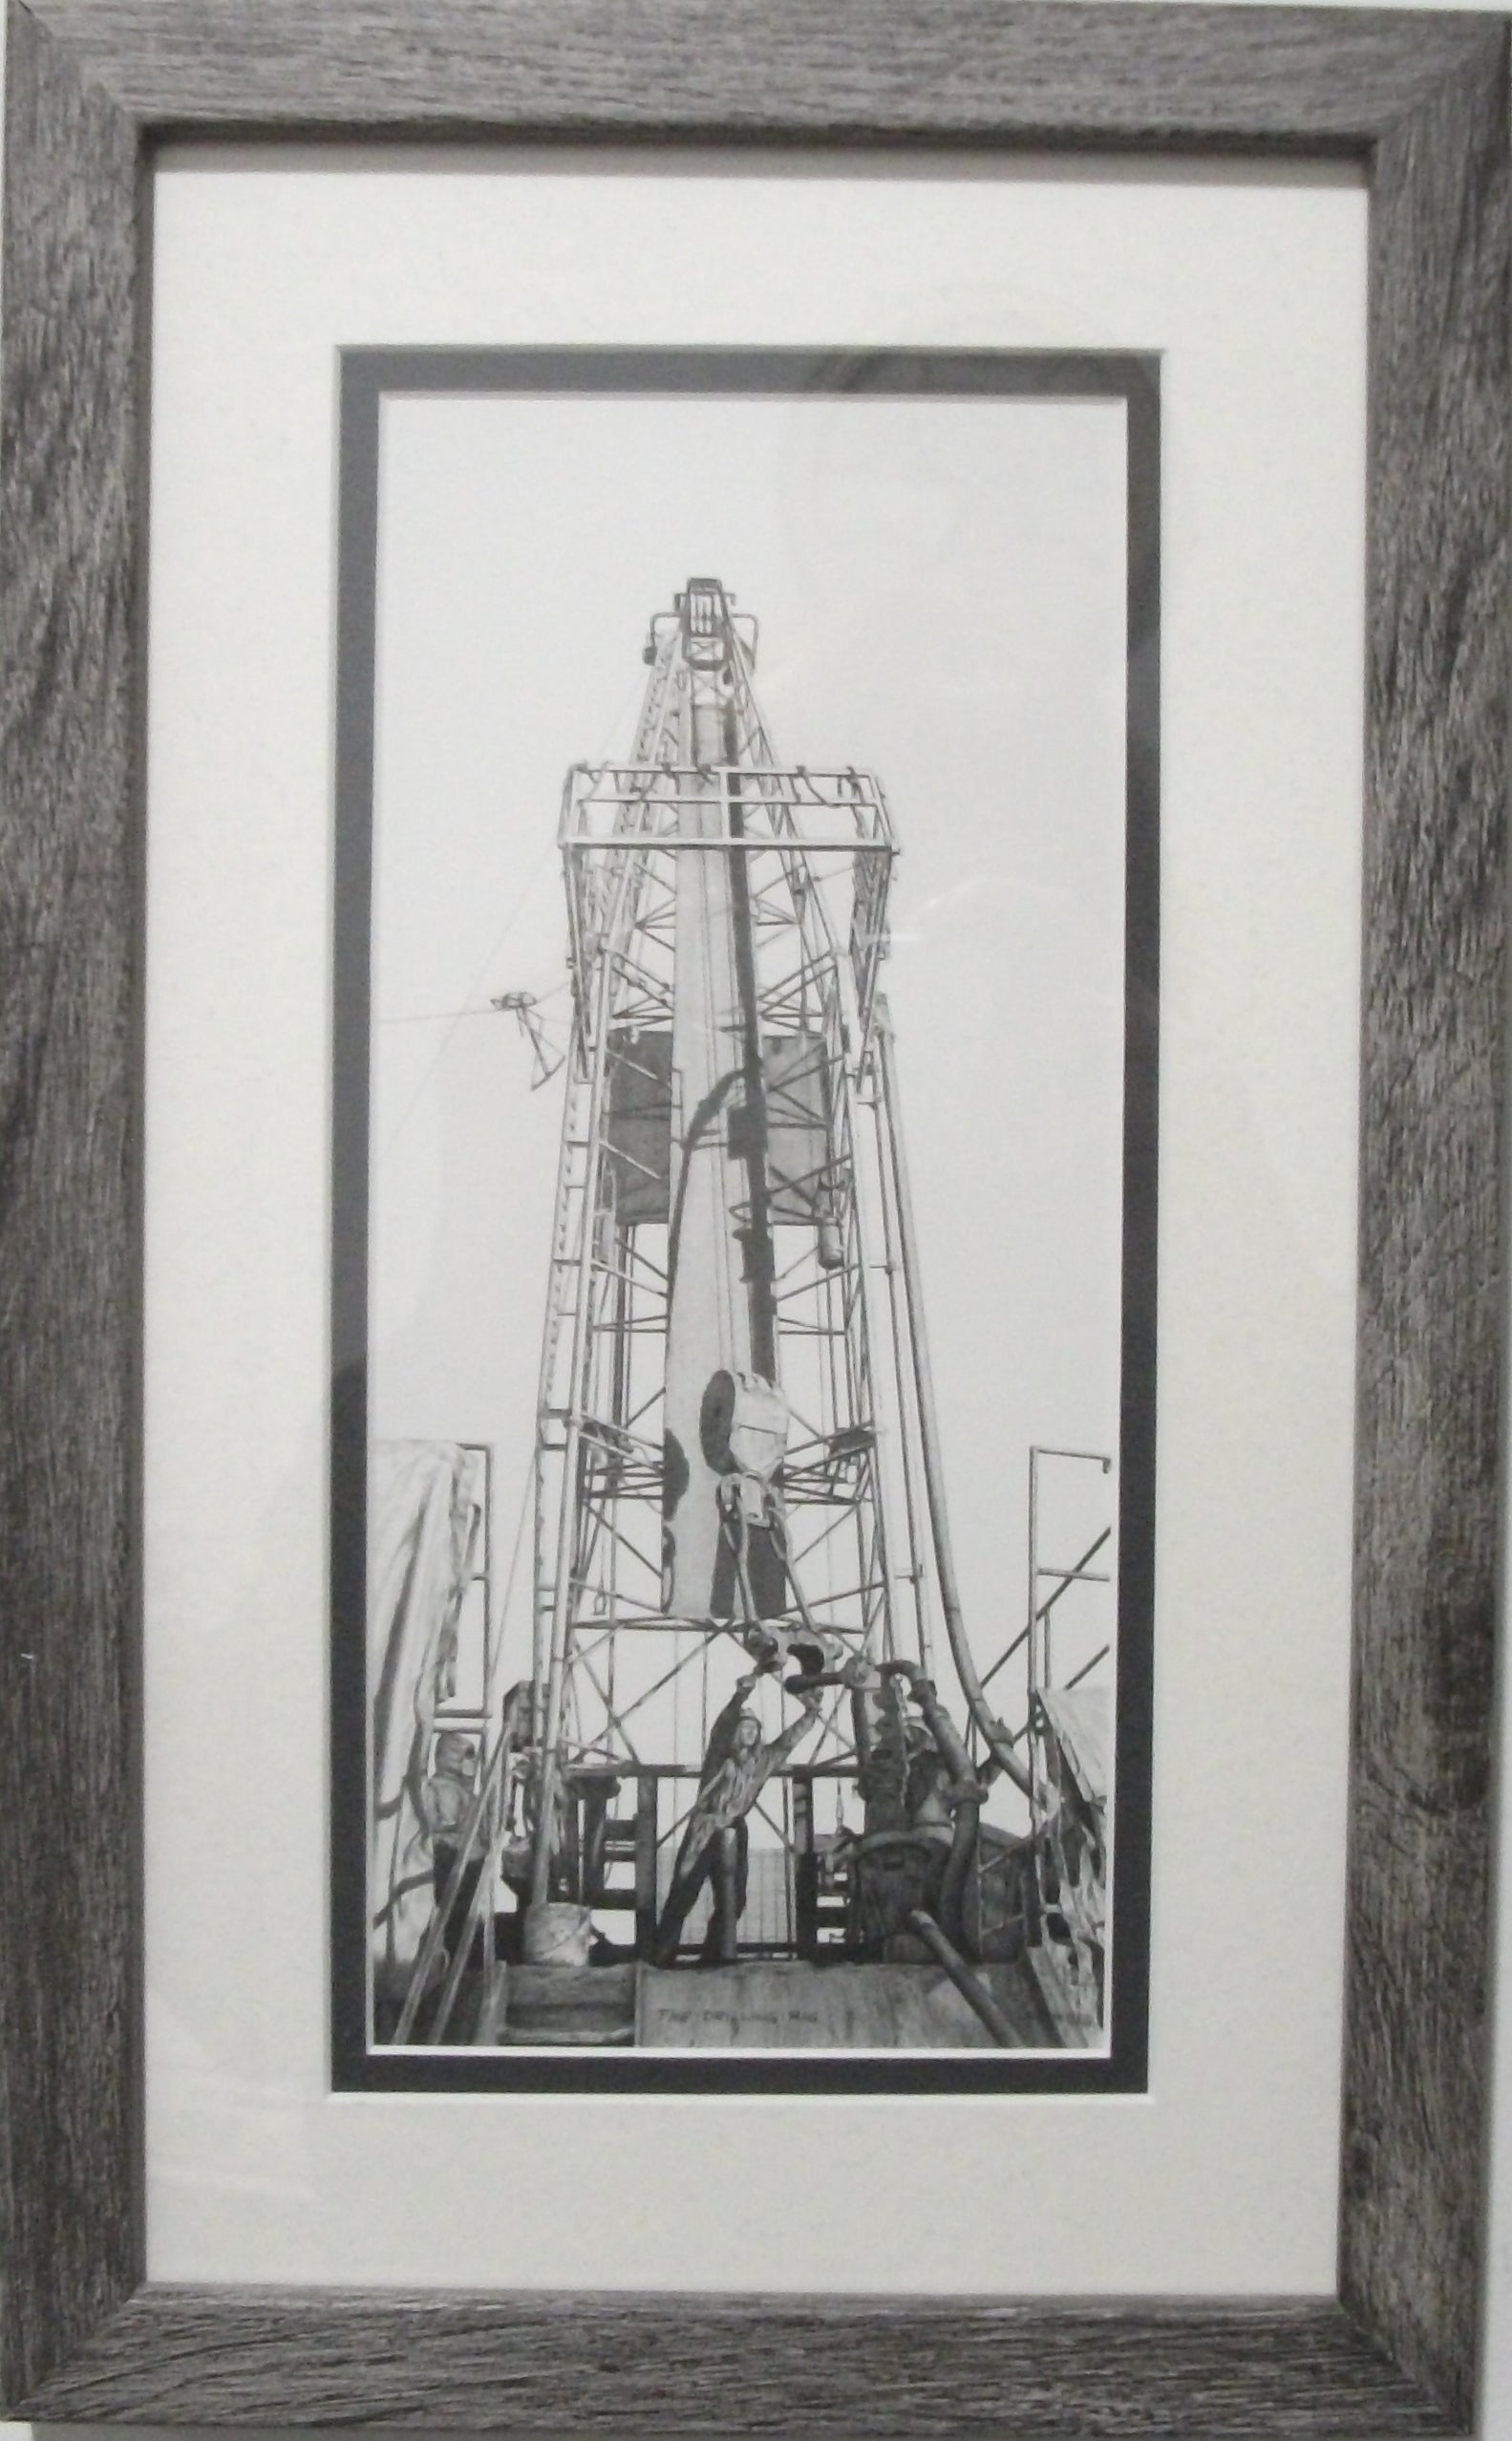 The Drilling Rig by Bernie Brown